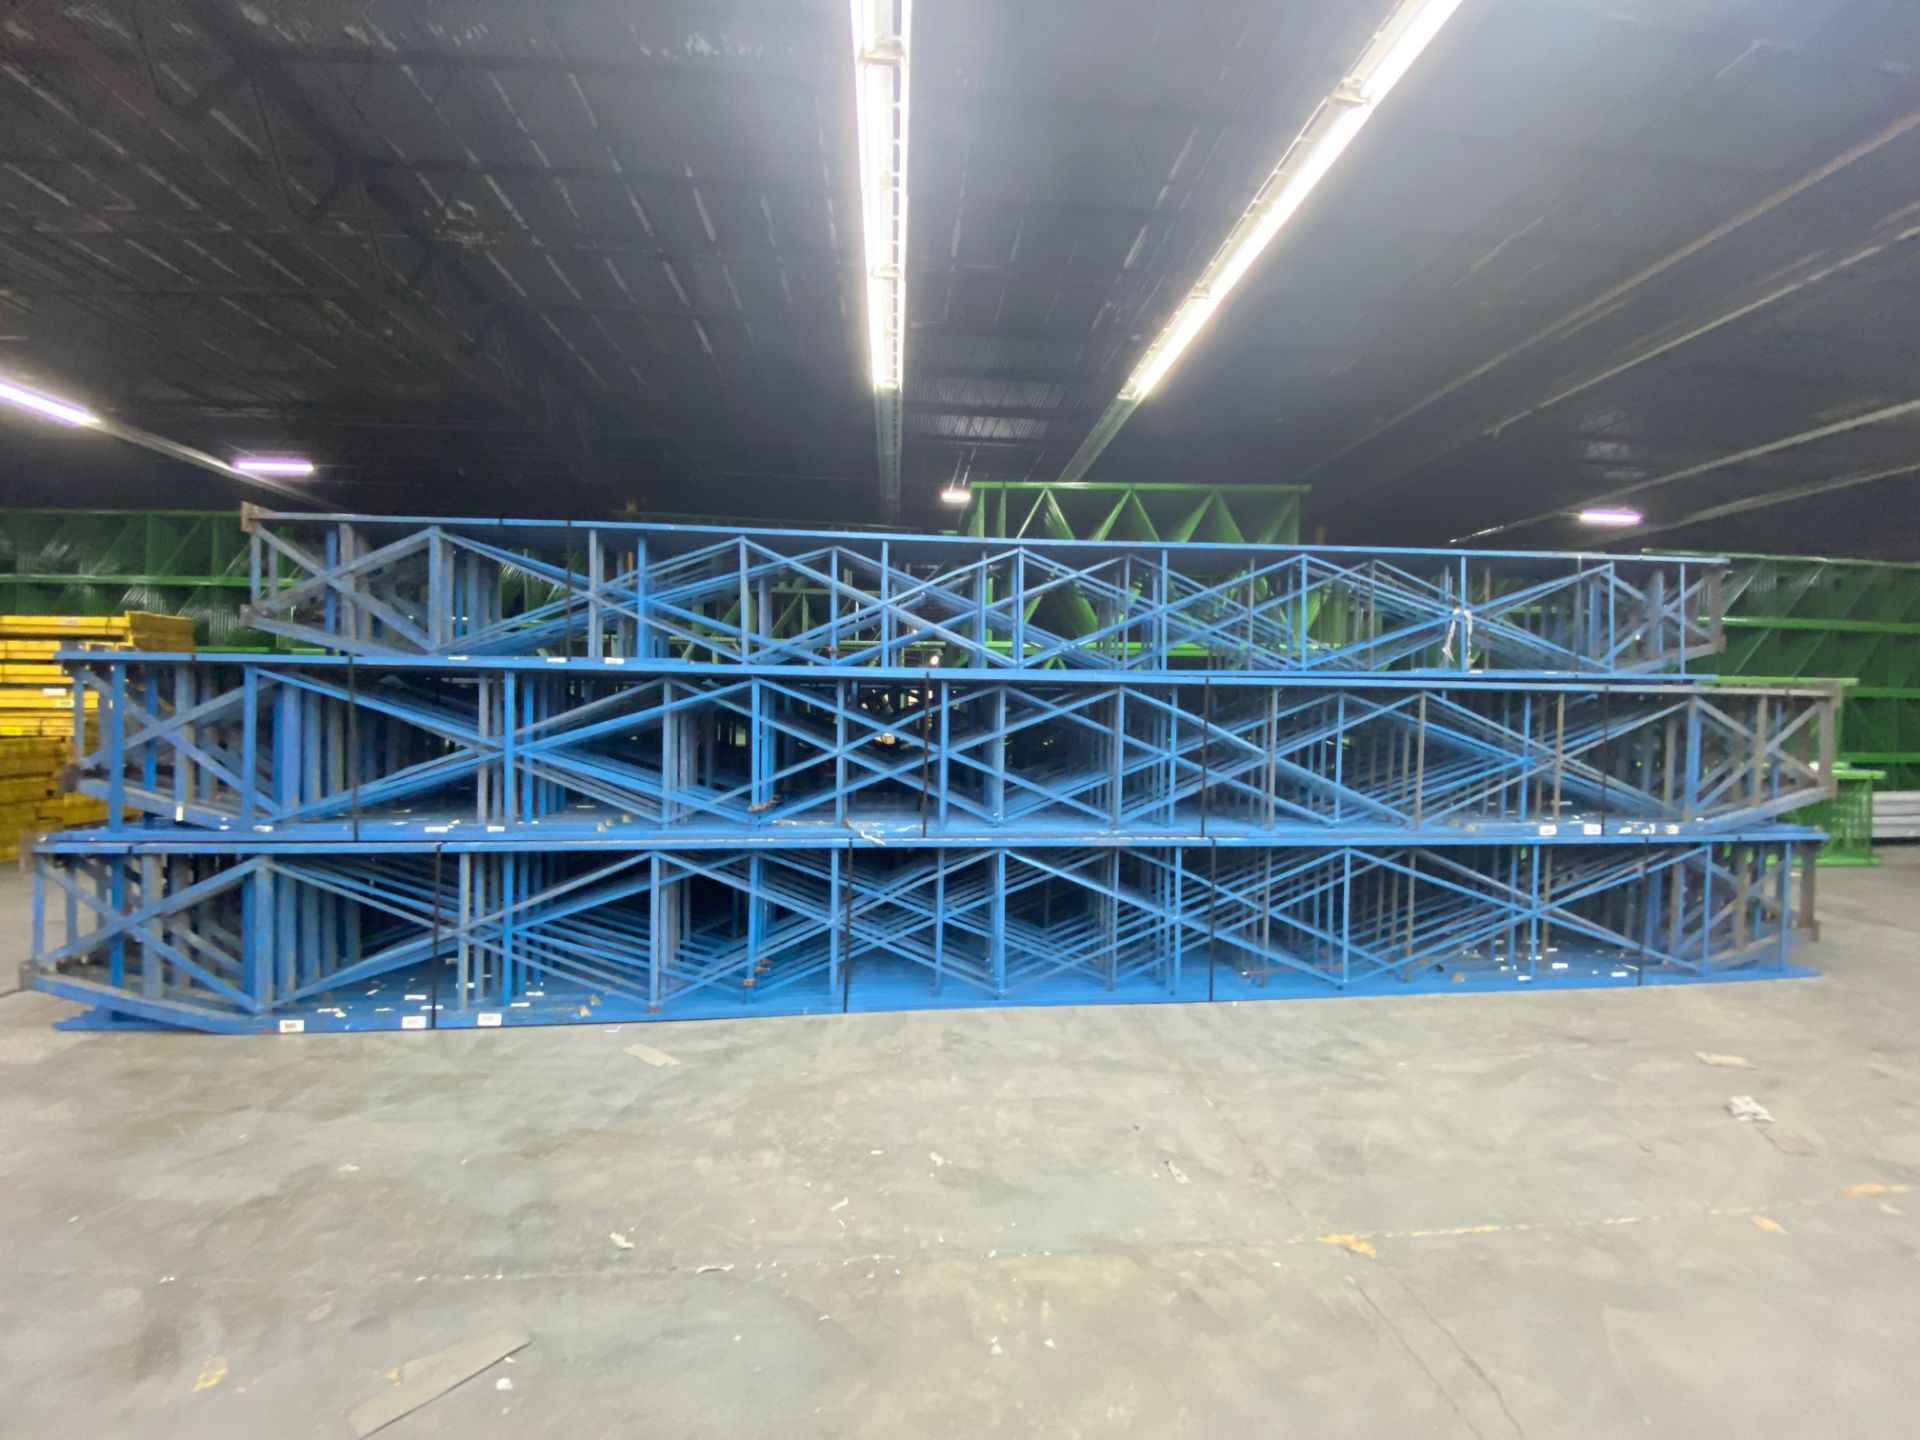 (30X) USED STRUCTURAL UPRIGHT. SIZE 30'H TO 33'H X 36"D, BLUE